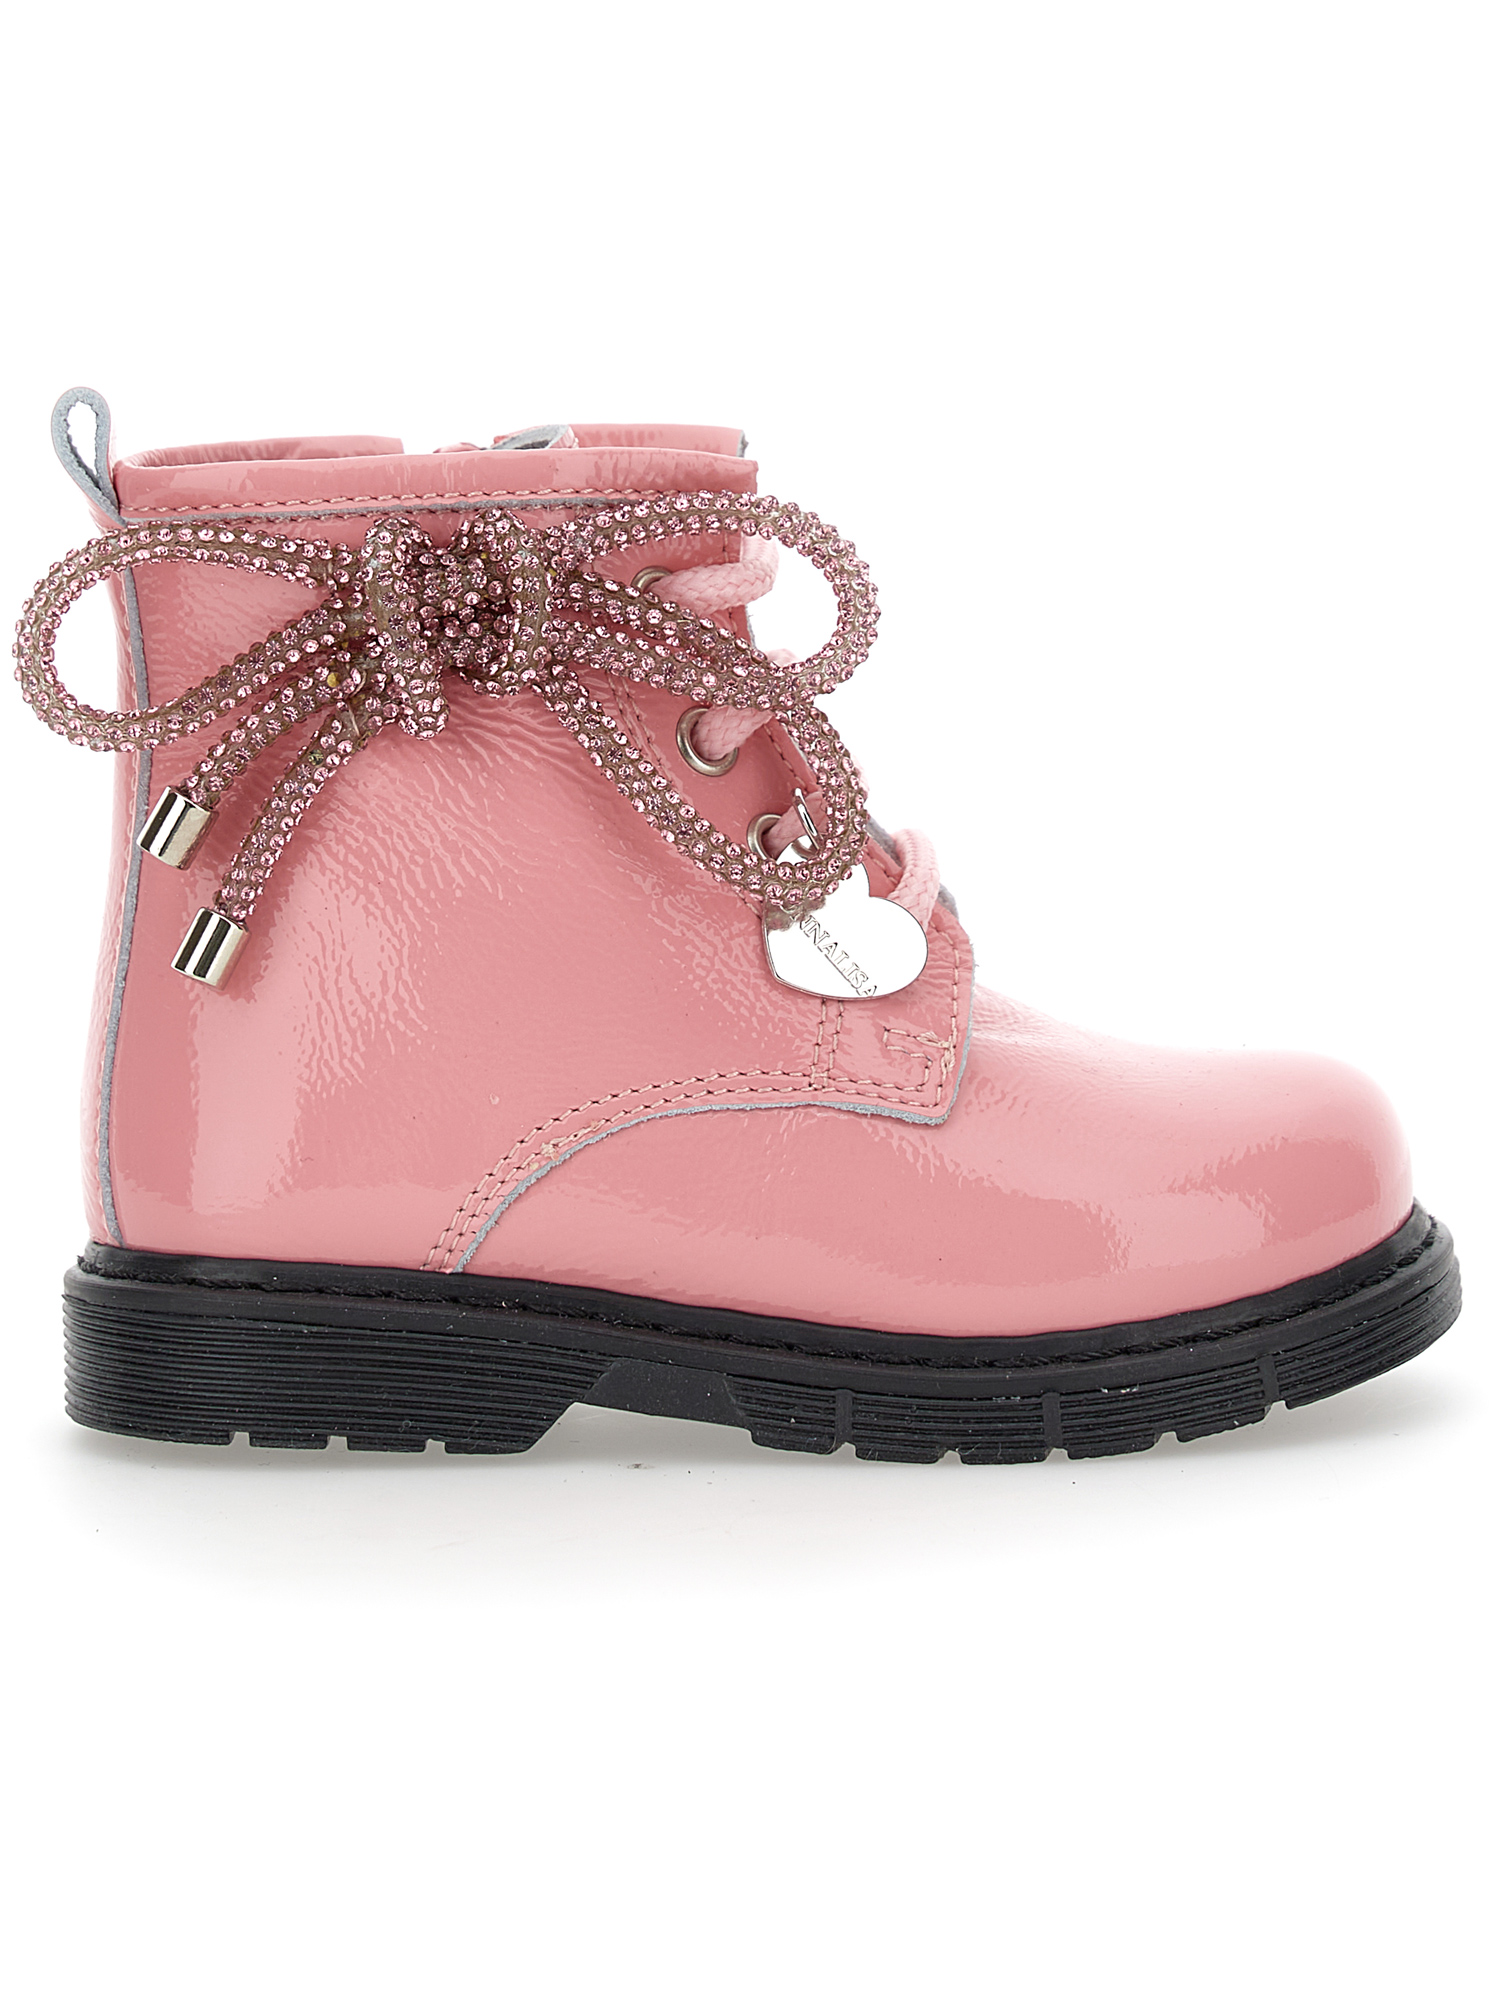 Shop Monnalisa Patent Chrome Leather Ankle Boots In Dusty Pink Rose